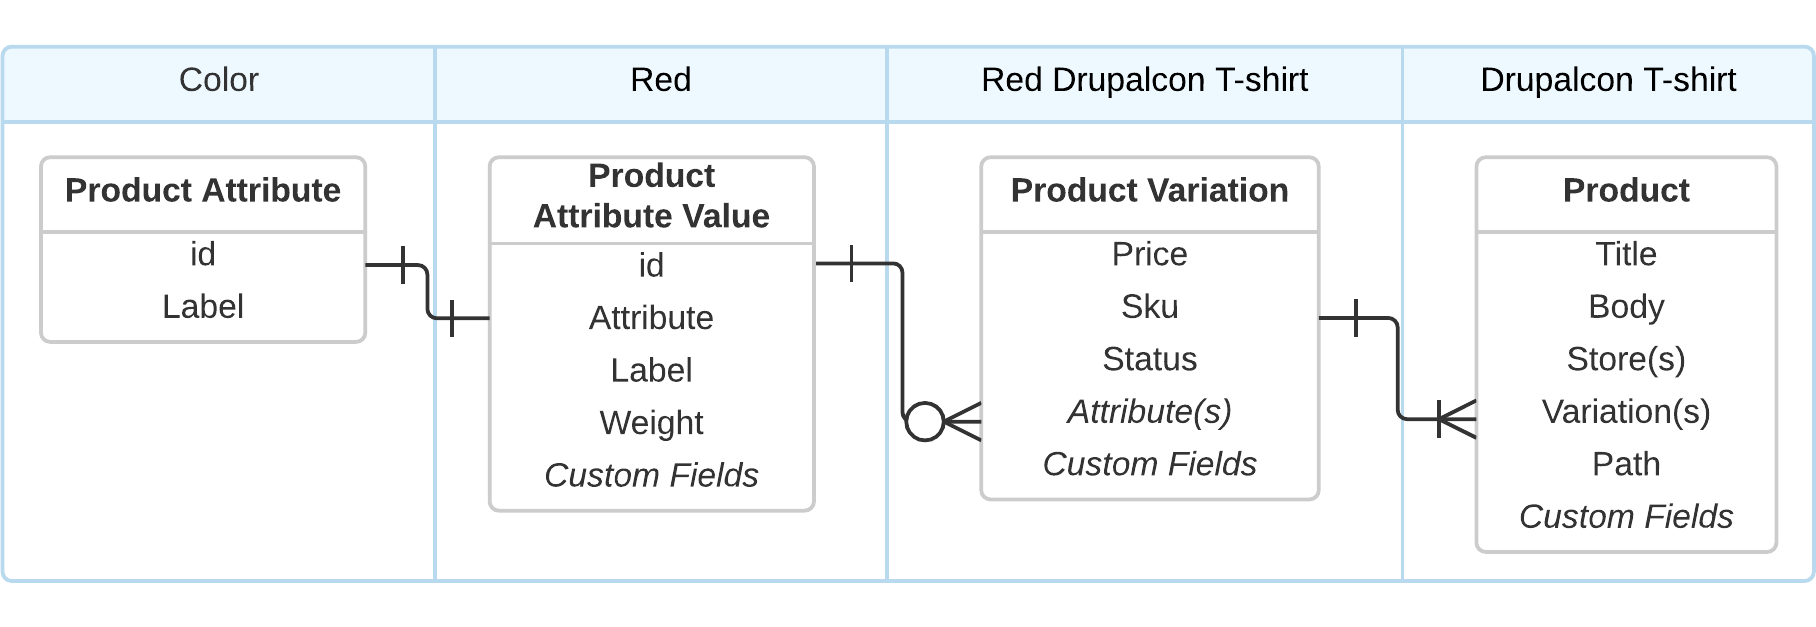 Product Information Structure